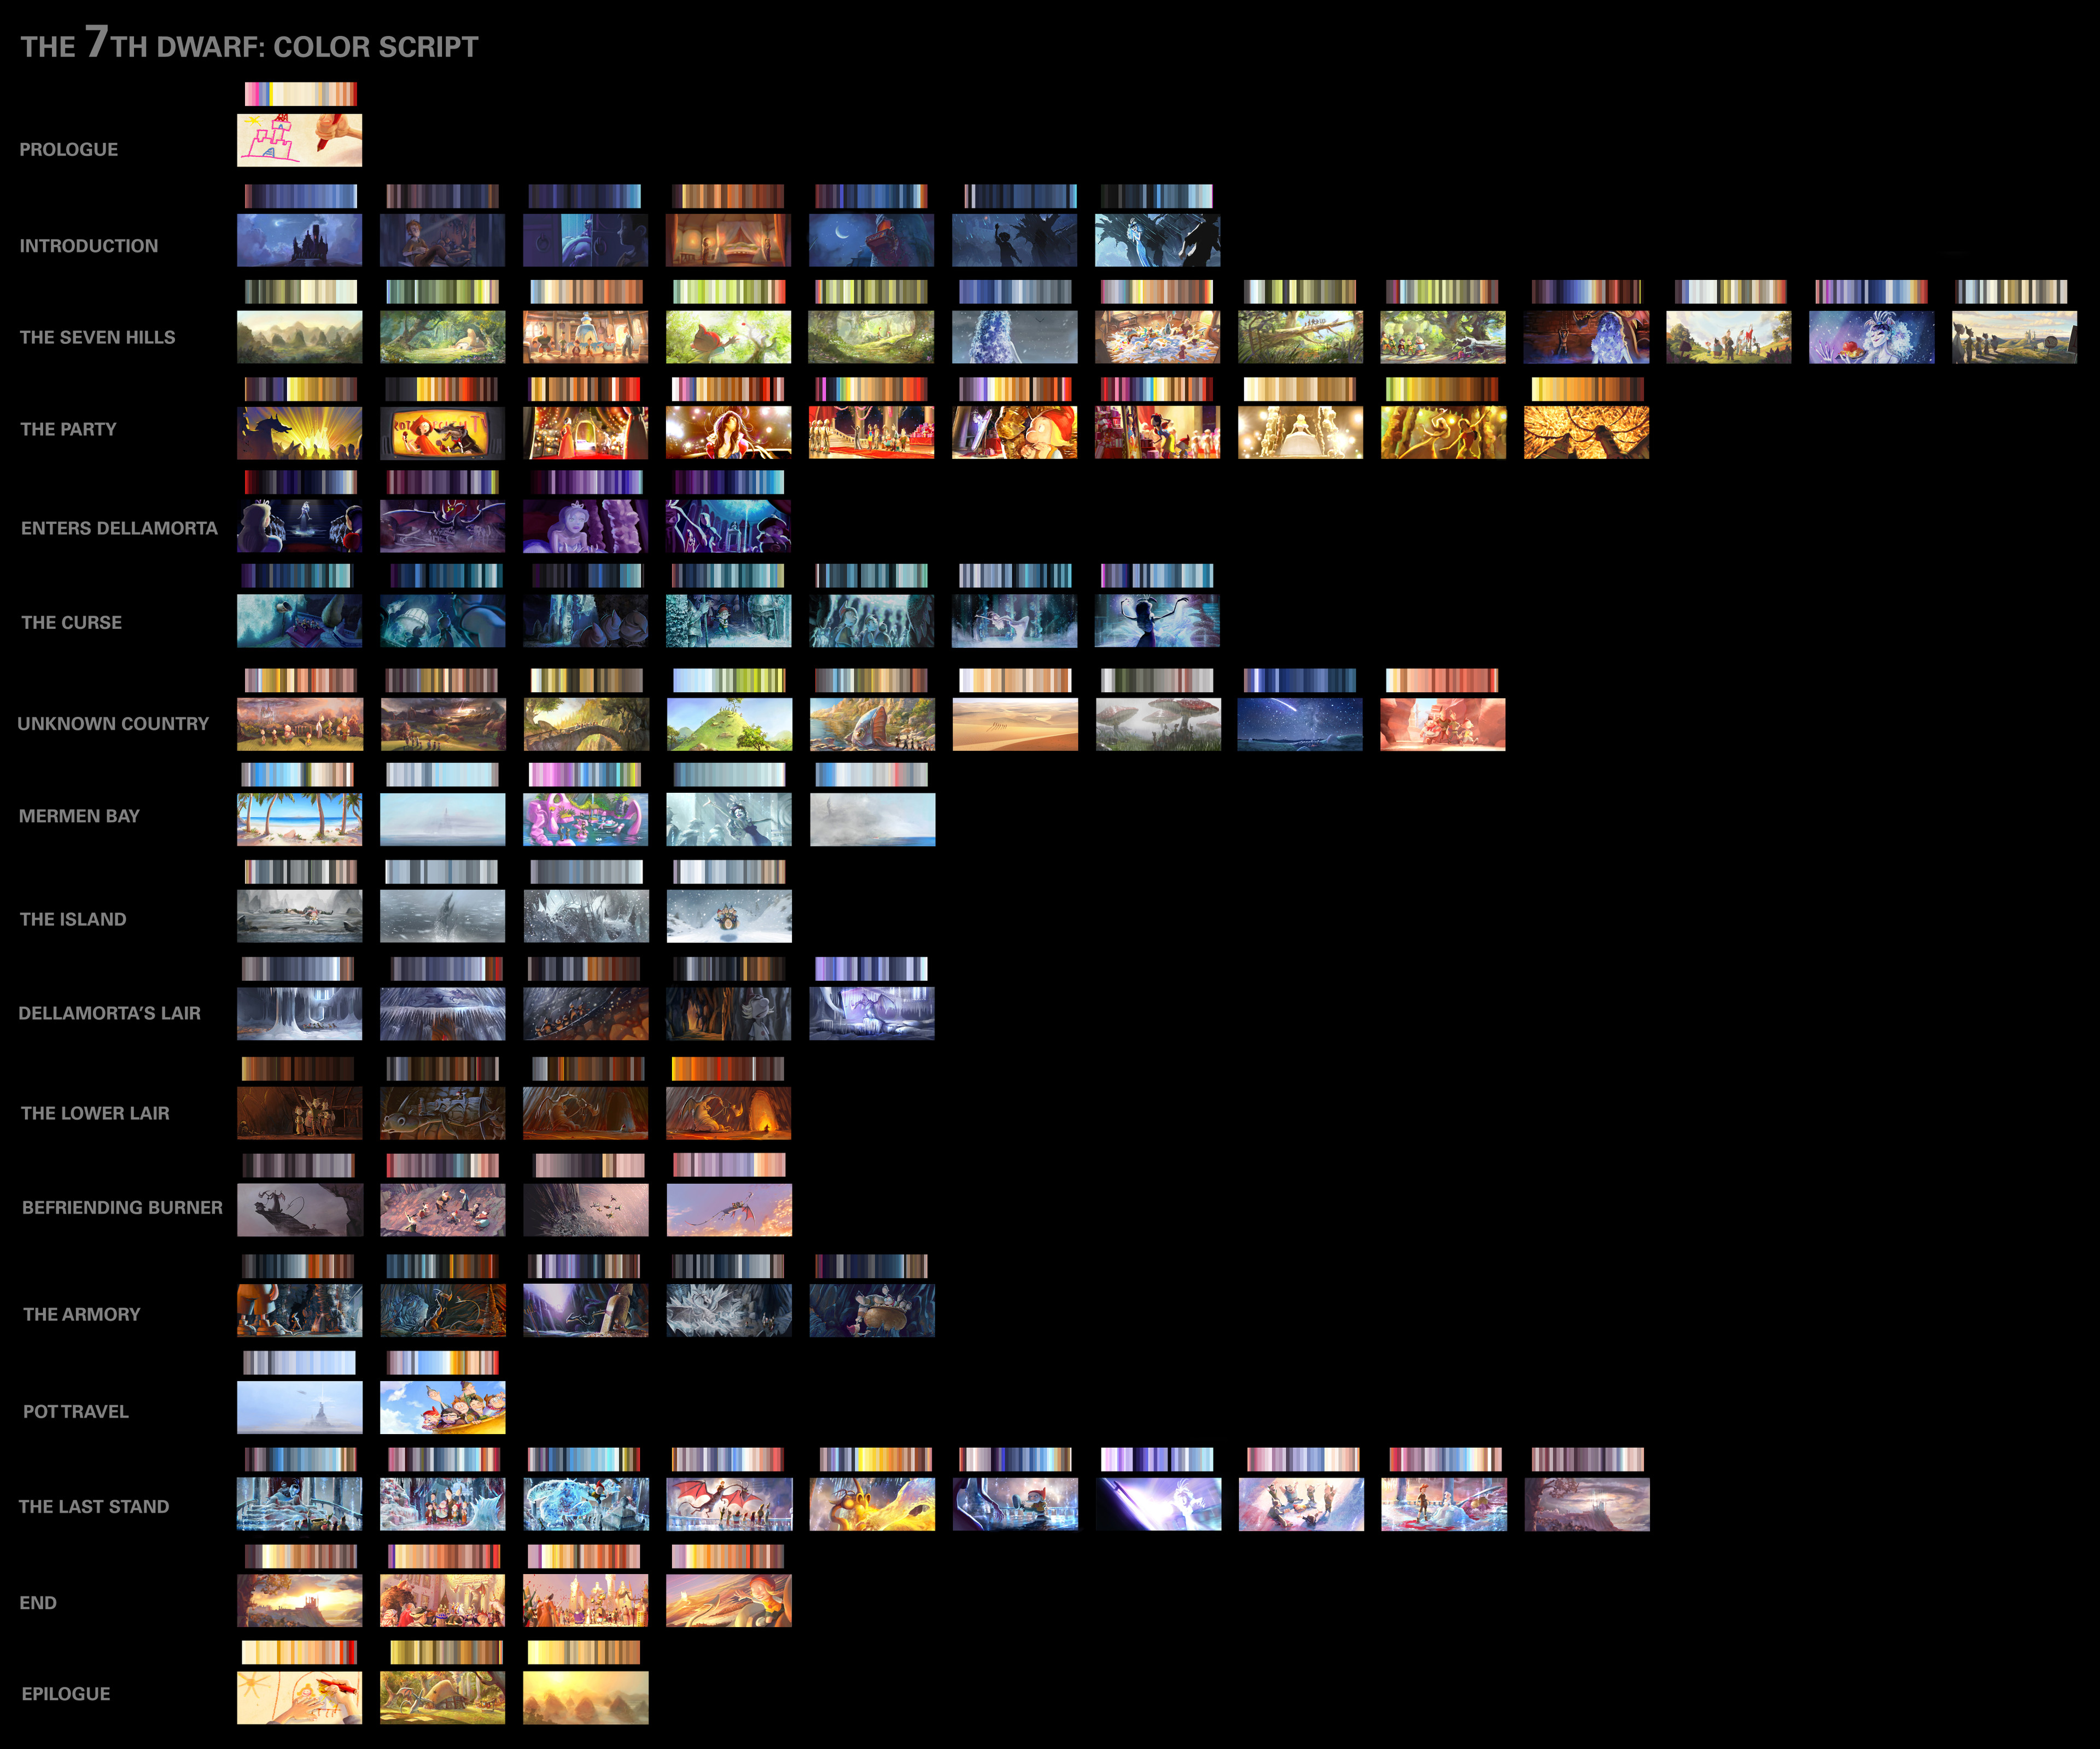 The full color script, arranged by scenes